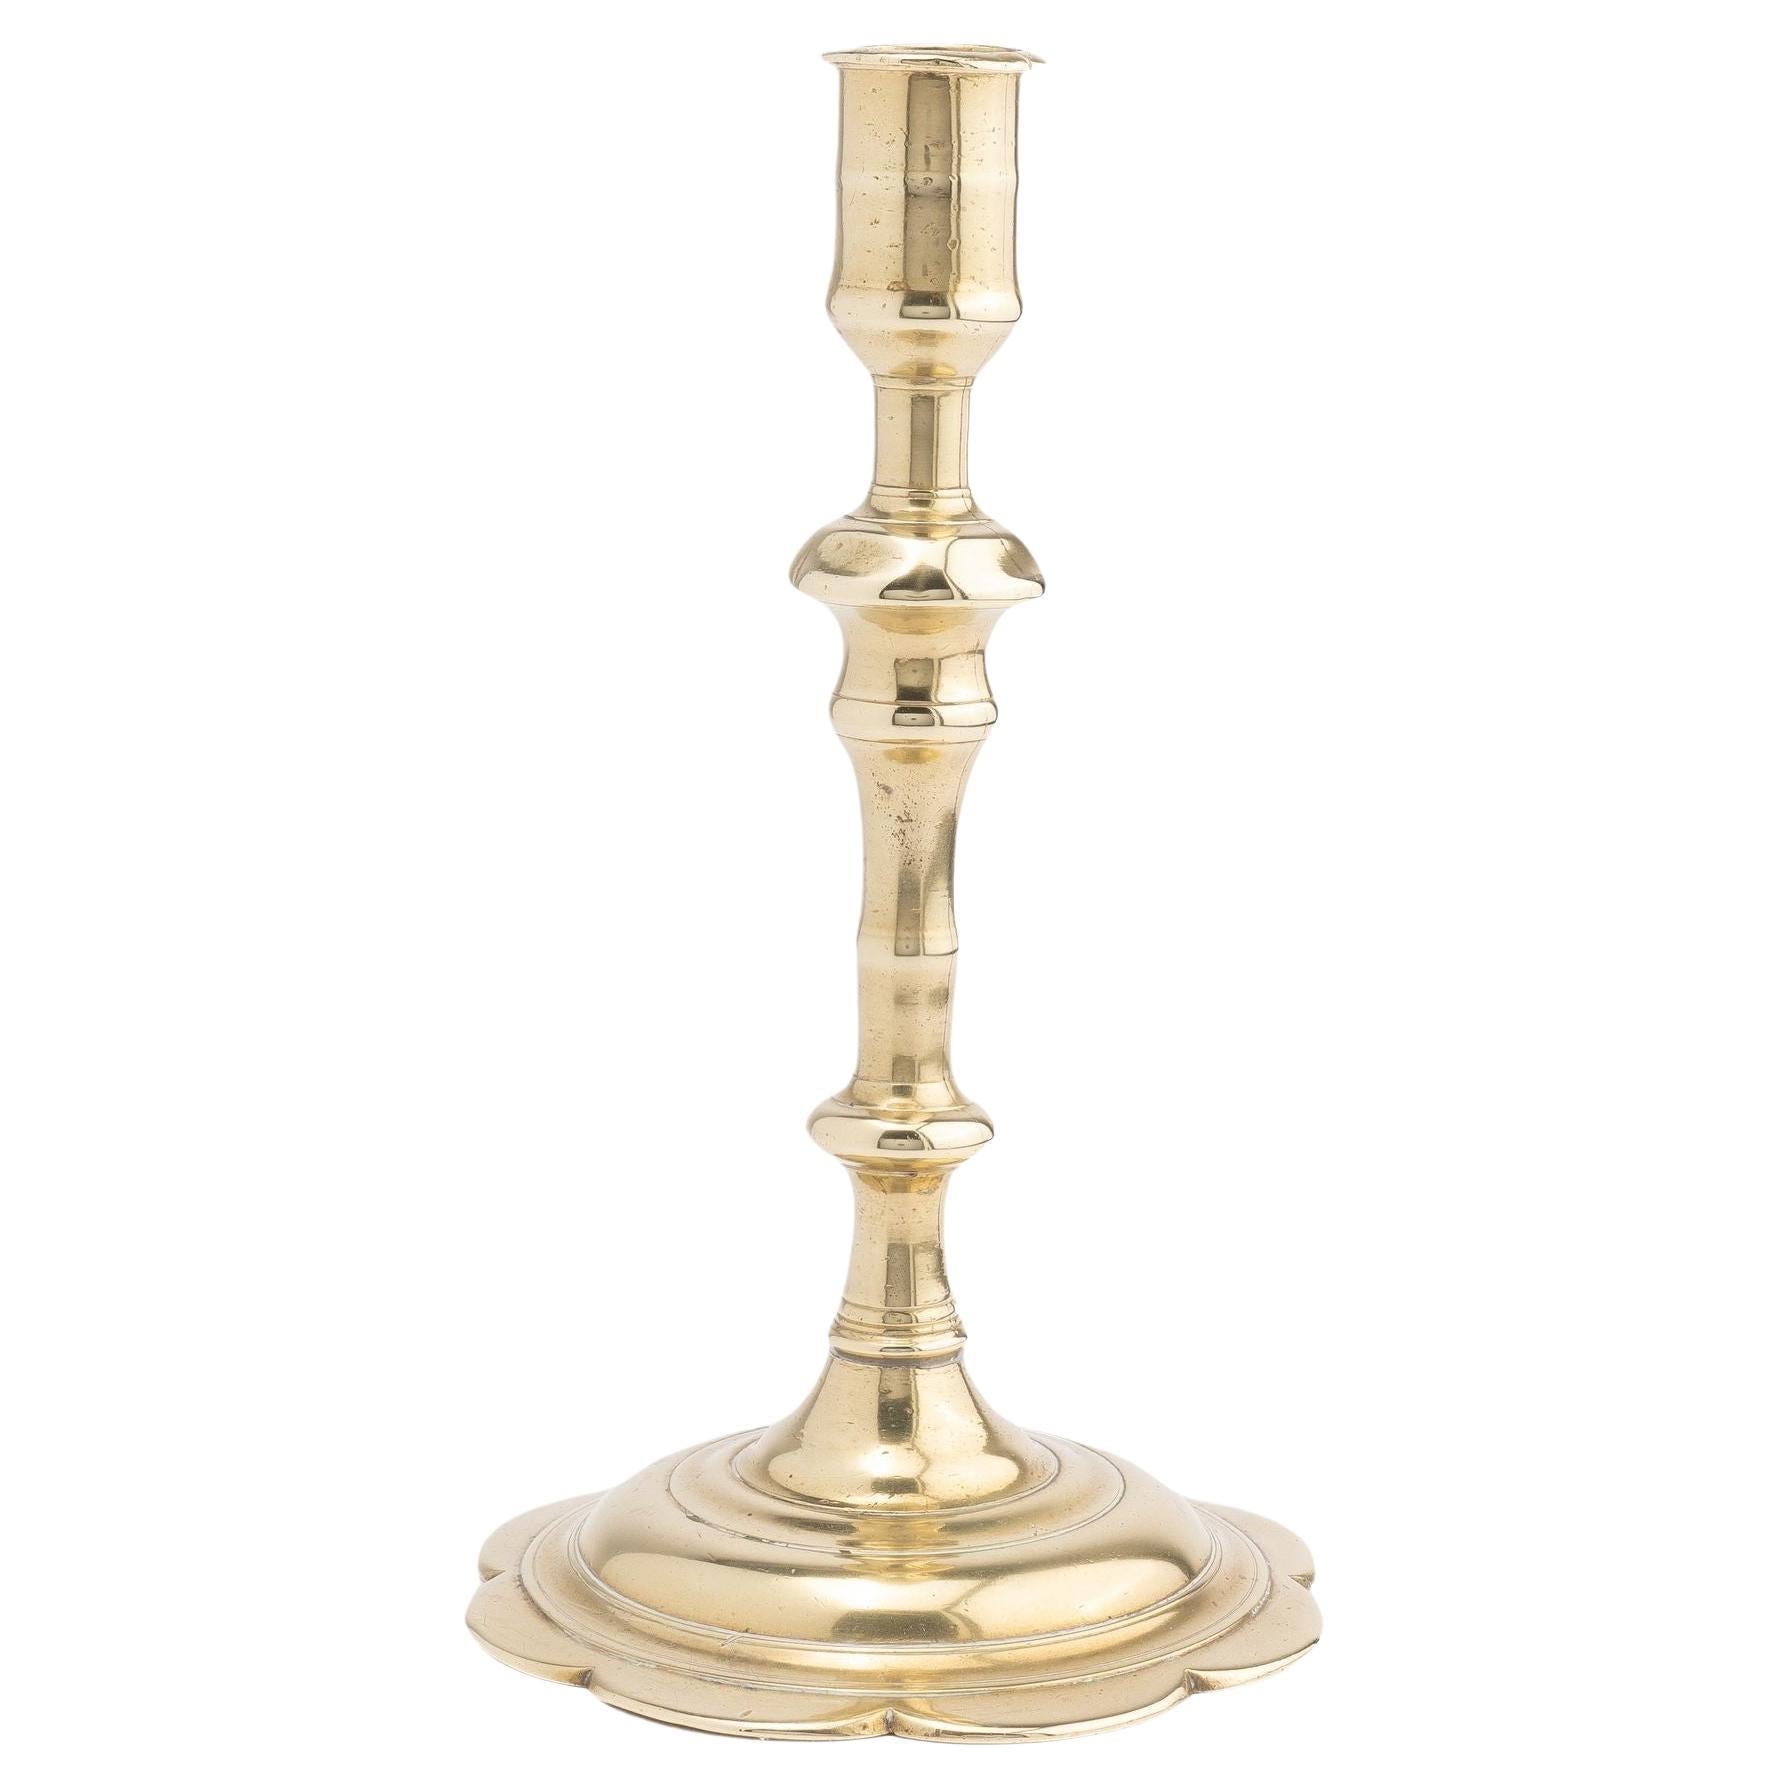 English cast brass Queen Anne candlestick with candle cup, 1760-70